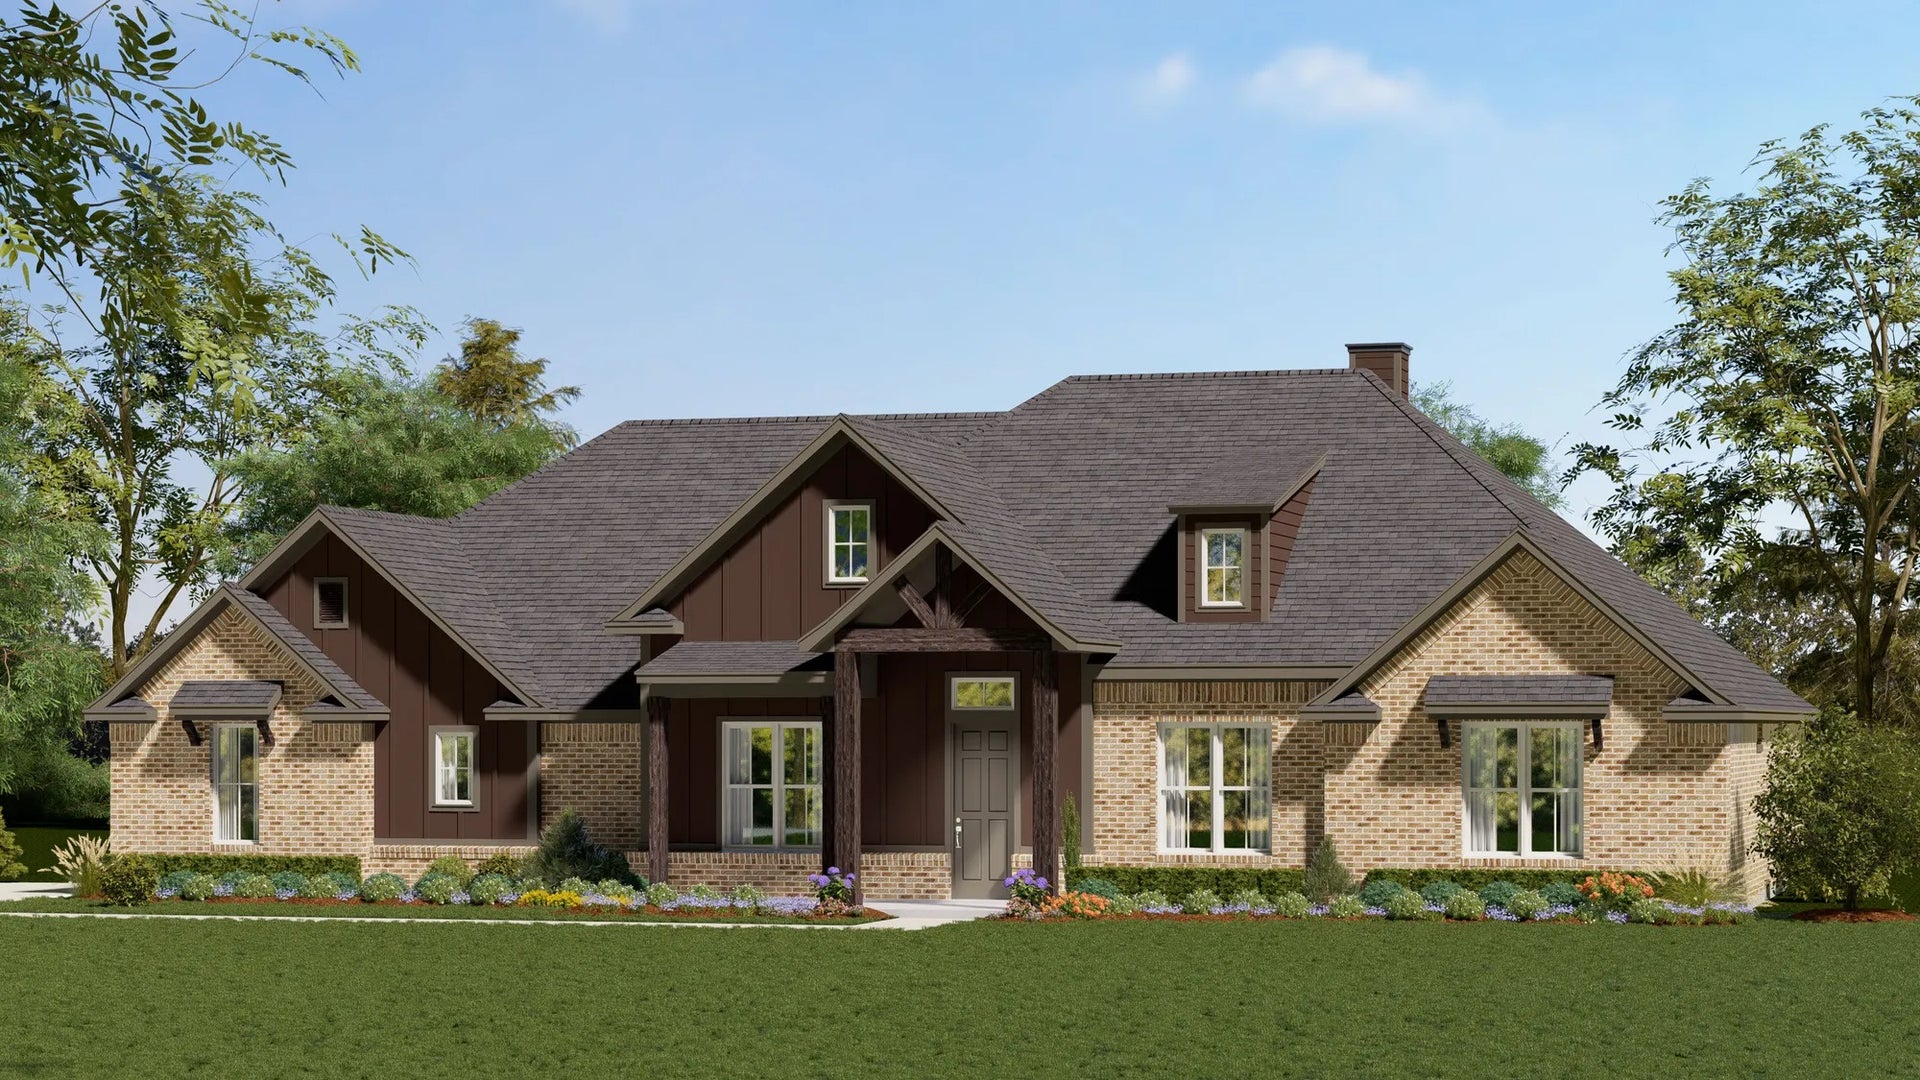 2915 C. Concept 2915 Home with 4 Bedrooms